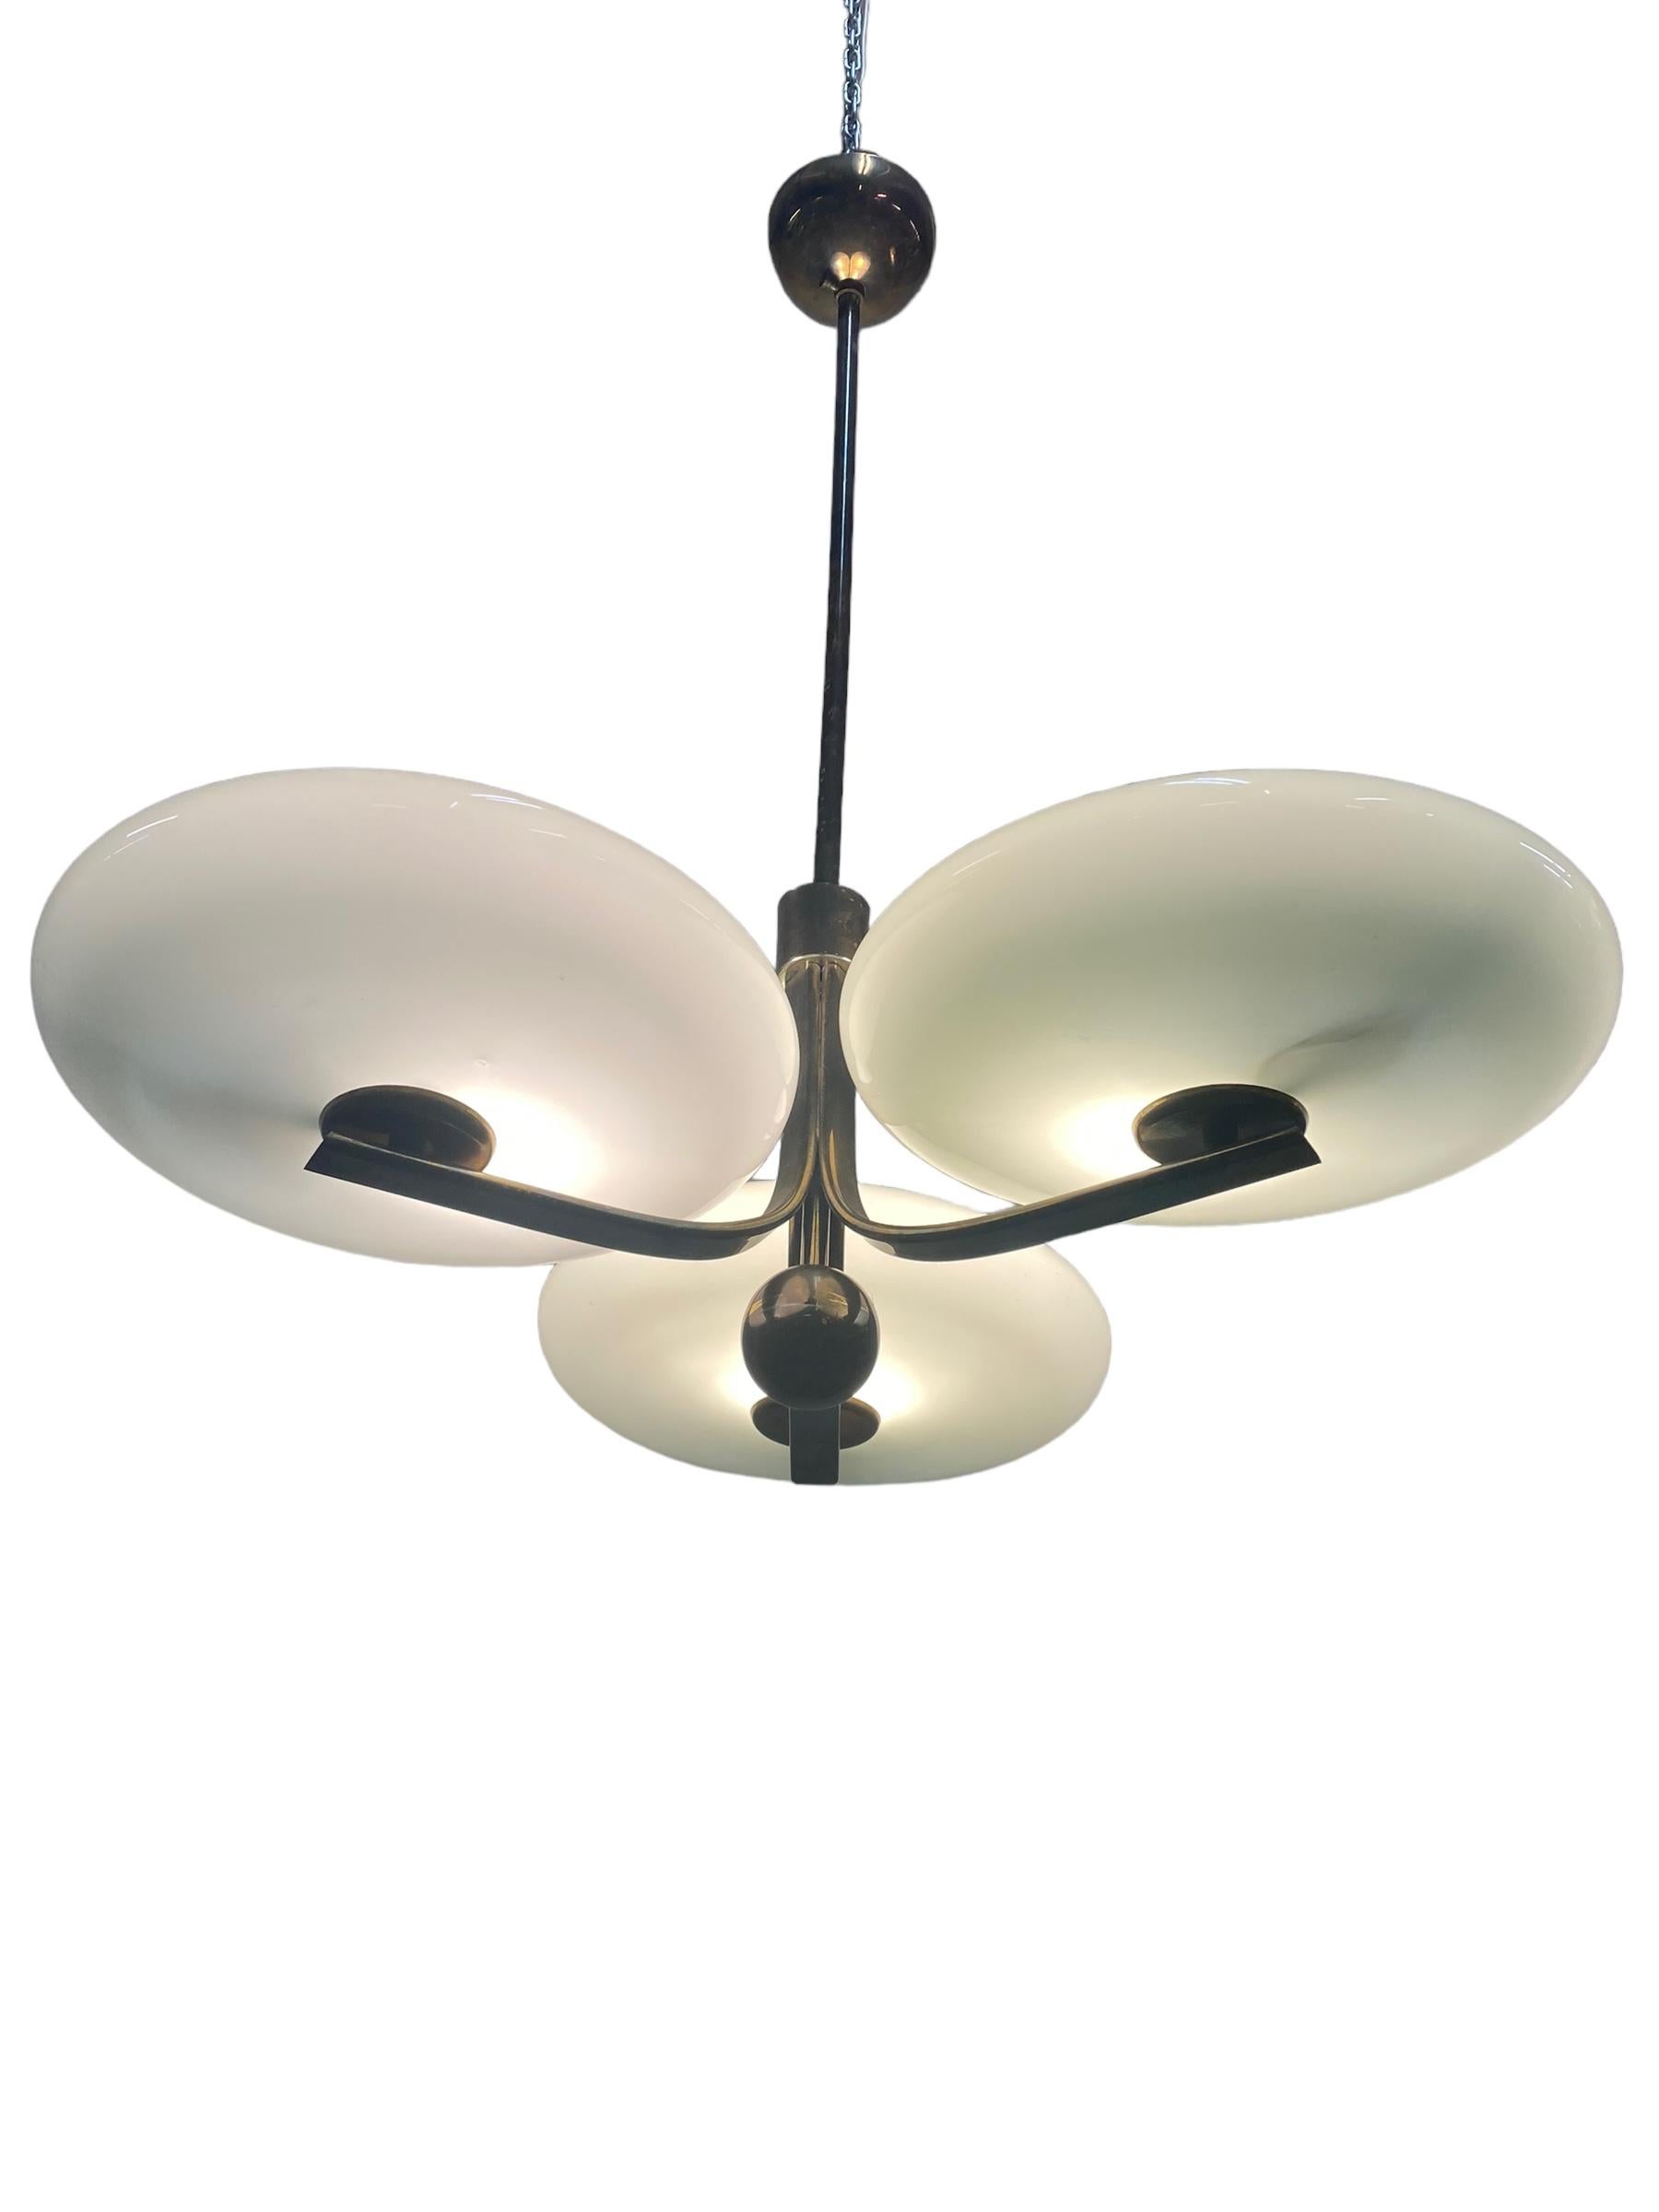 Mid-20th Century An Early 1930s Paavo Tynell Ceiling Lamp in Full Original Condition For Sale